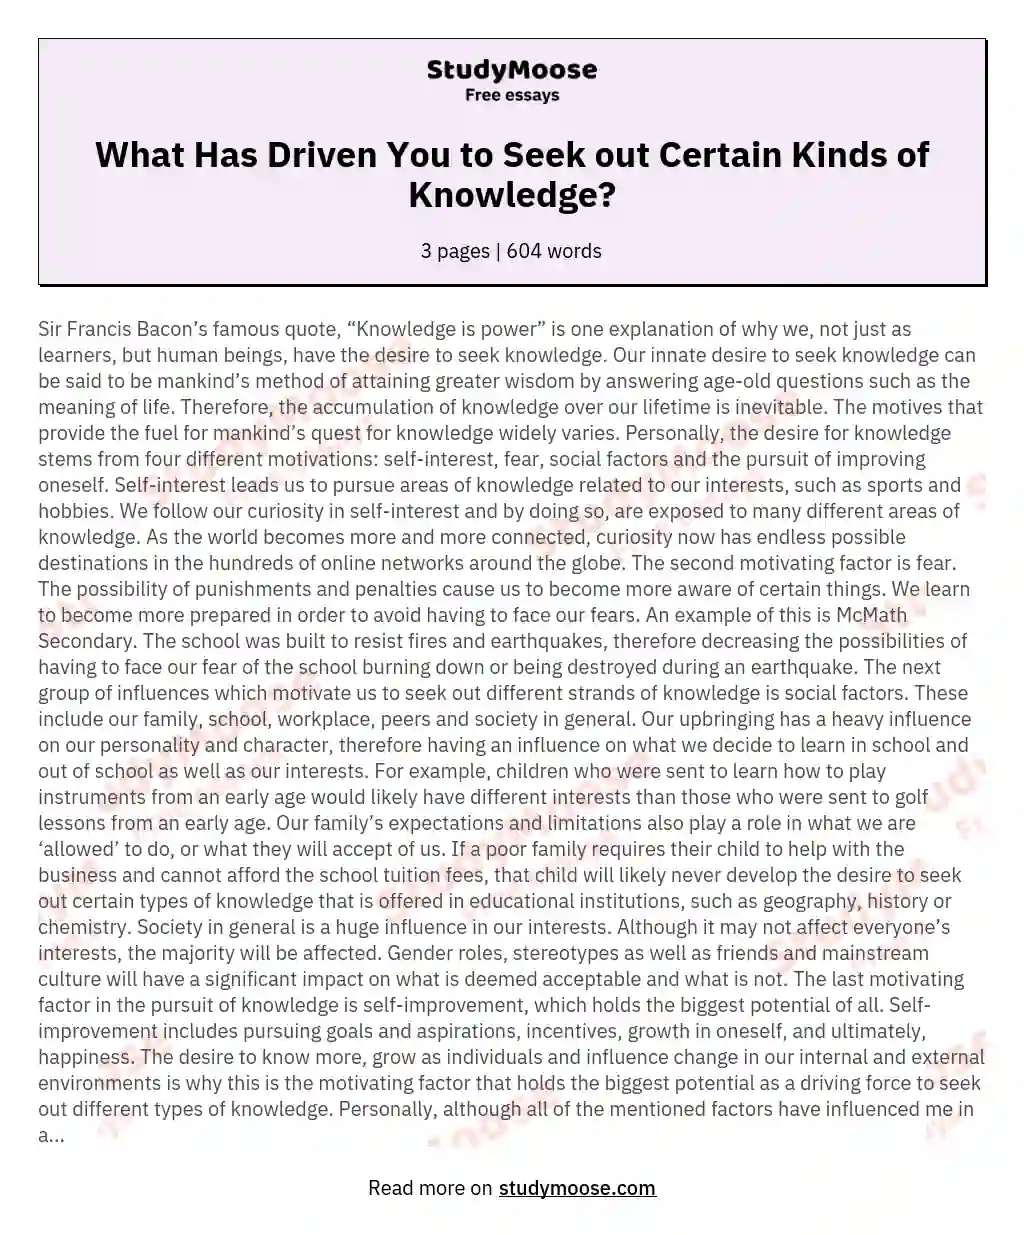 What Has Driven You to Seek out Certain Kinds of Knowledge? essay